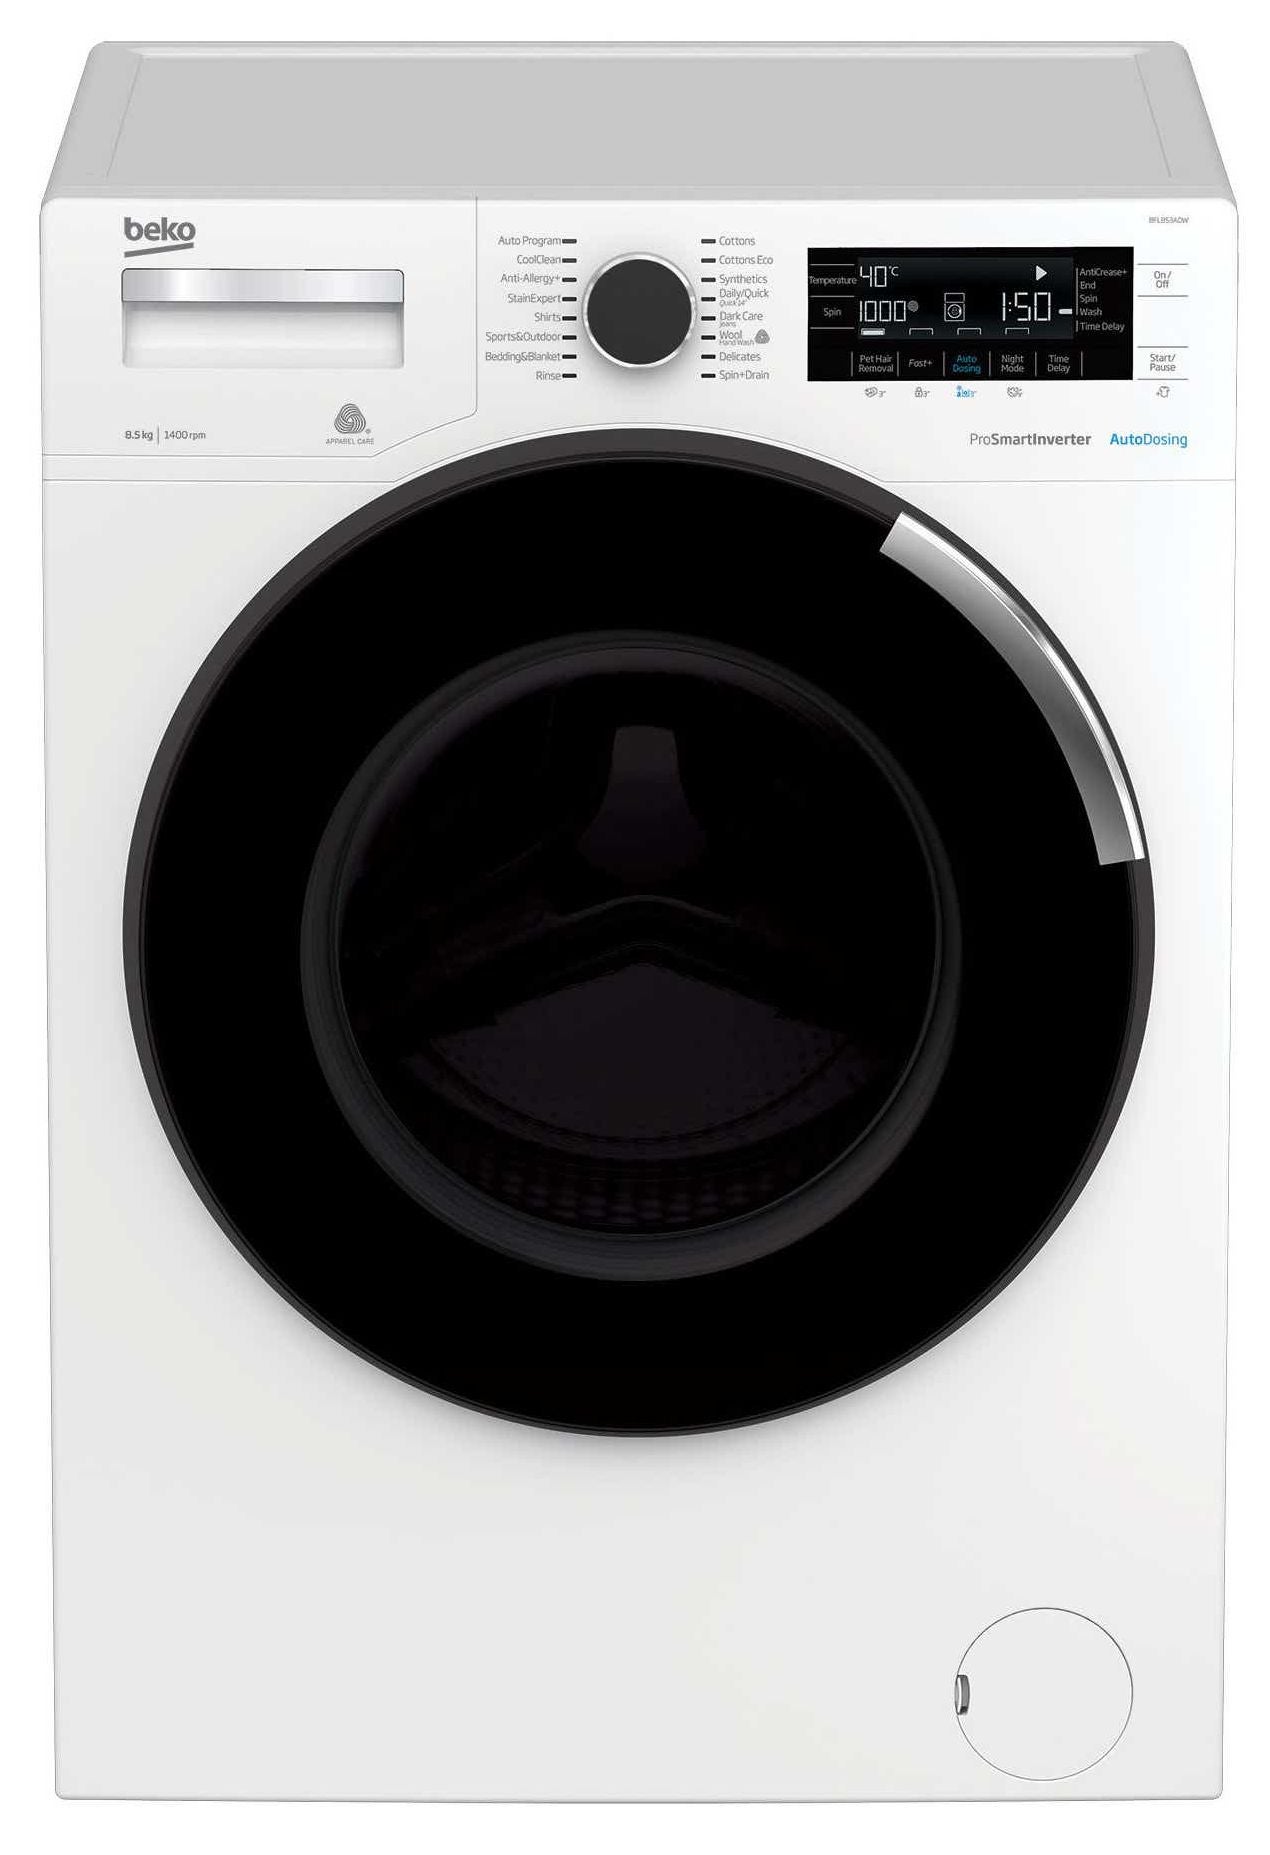 Beko 8.5kg Front Load Washing Machine with Autodose review